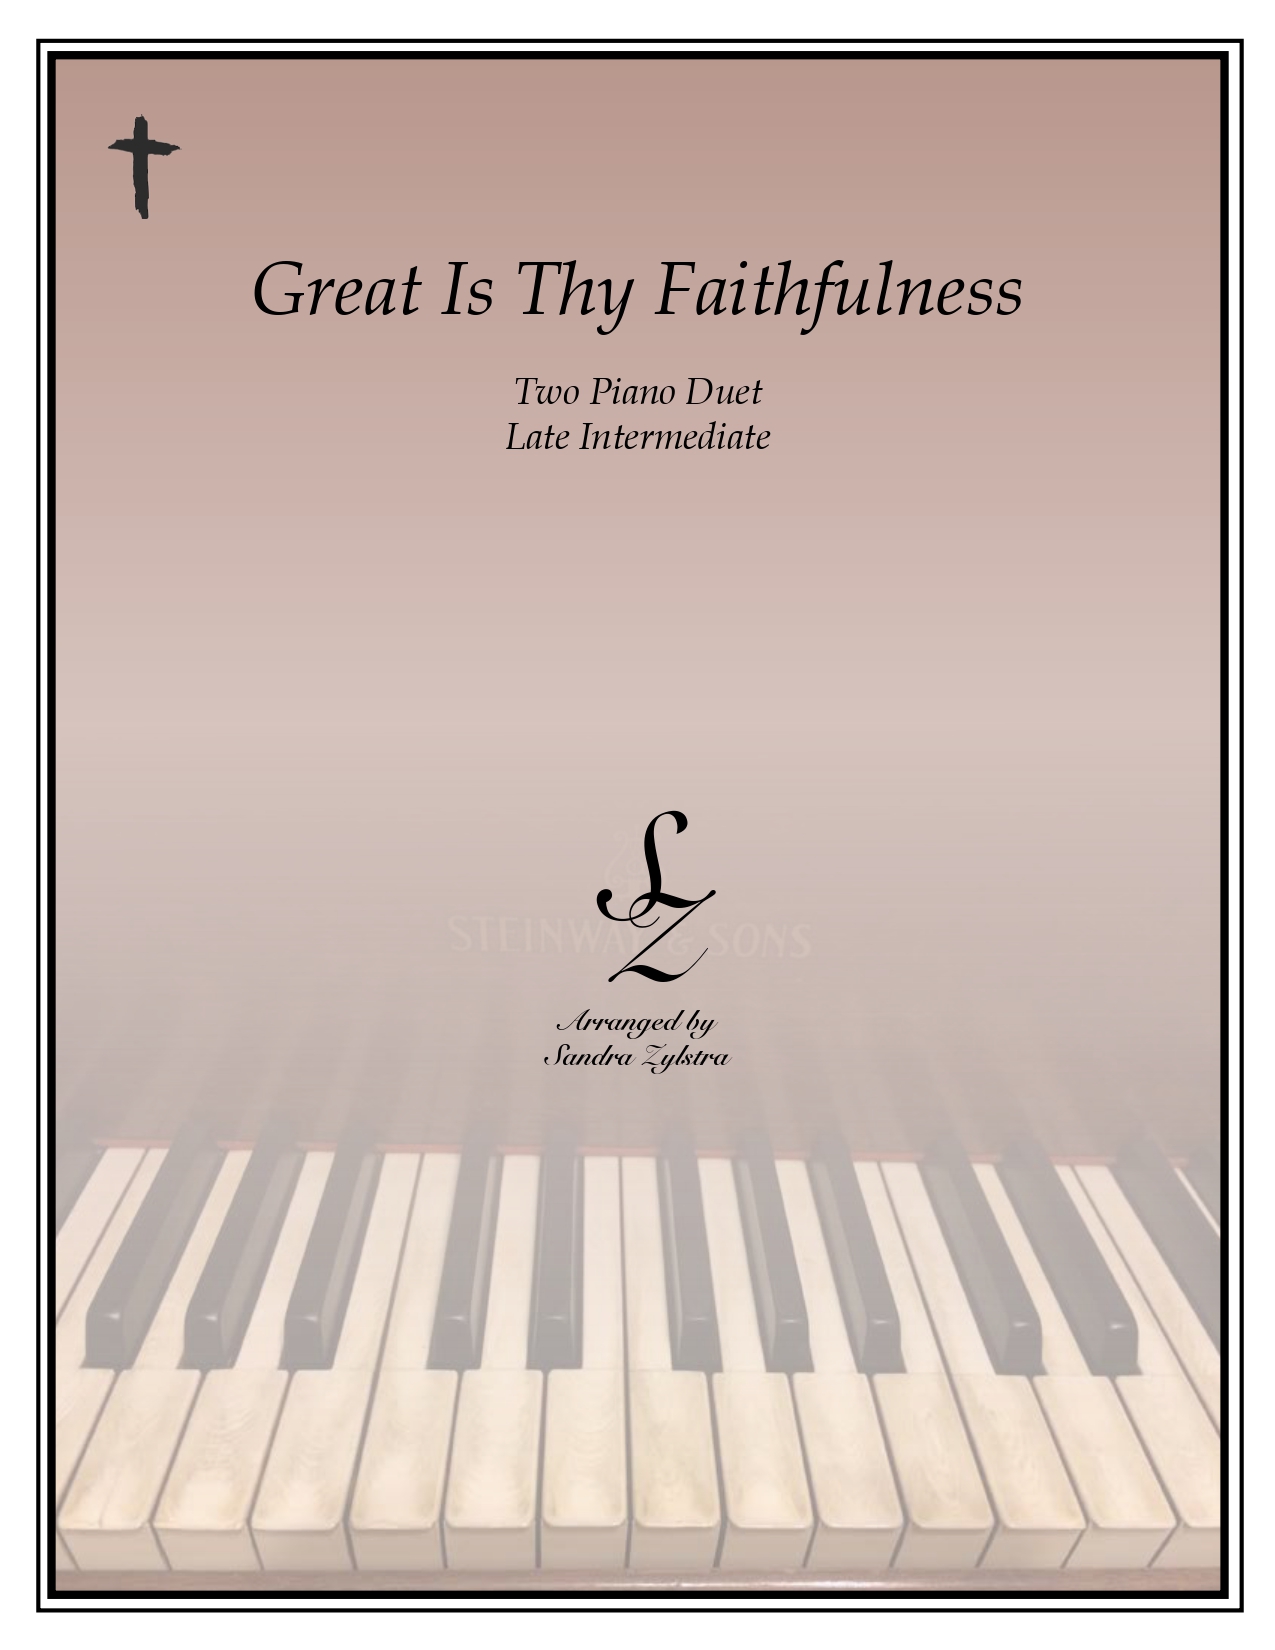 Great Is Thy Faithfulness Duet cover page 00011